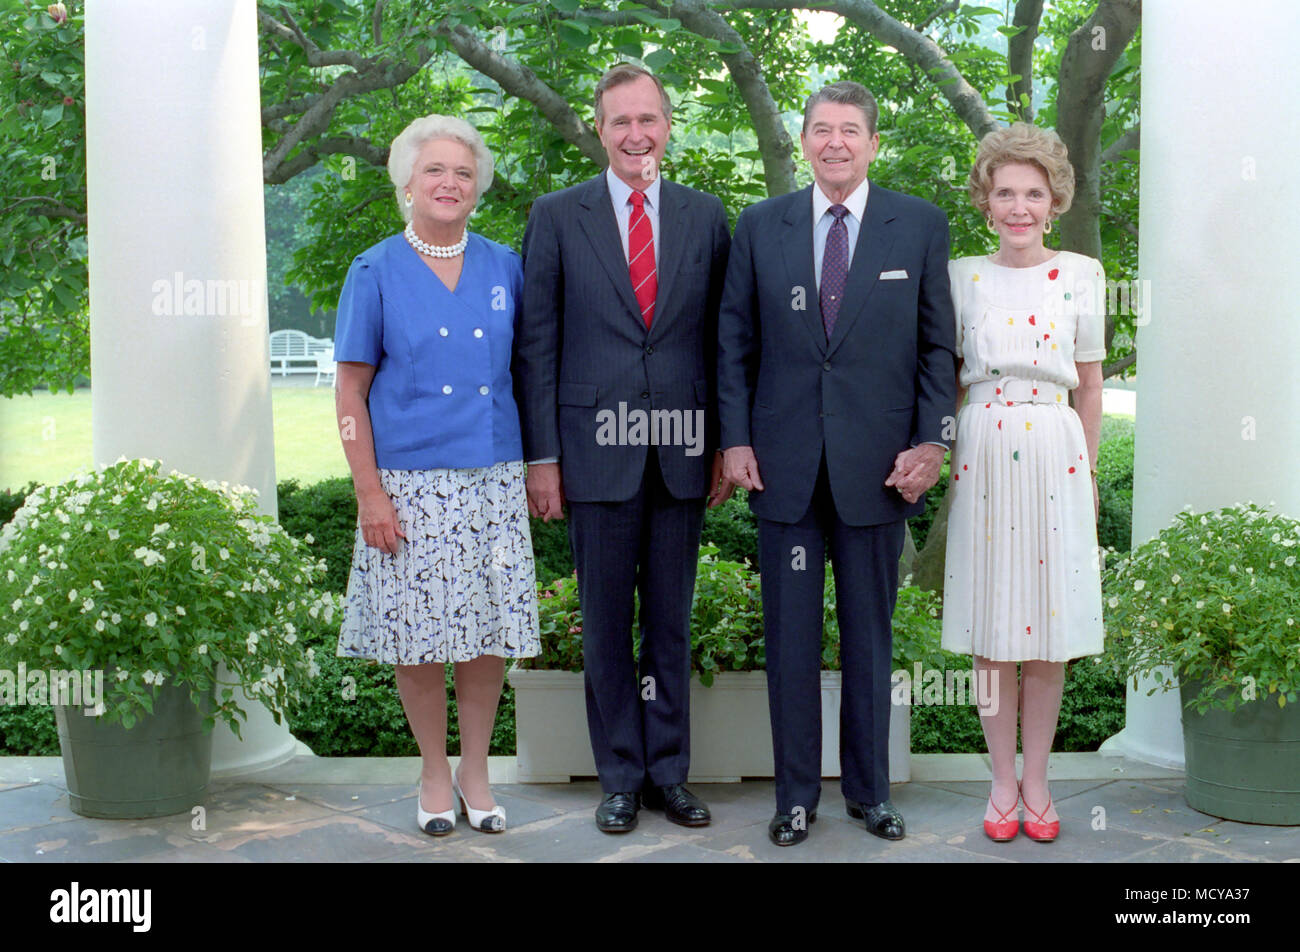 8/11/1988 Official portrait of President Reagan, Nancy Reagan, Vice President Bush and Barbara Bush on the White House colonnade Stock Photo